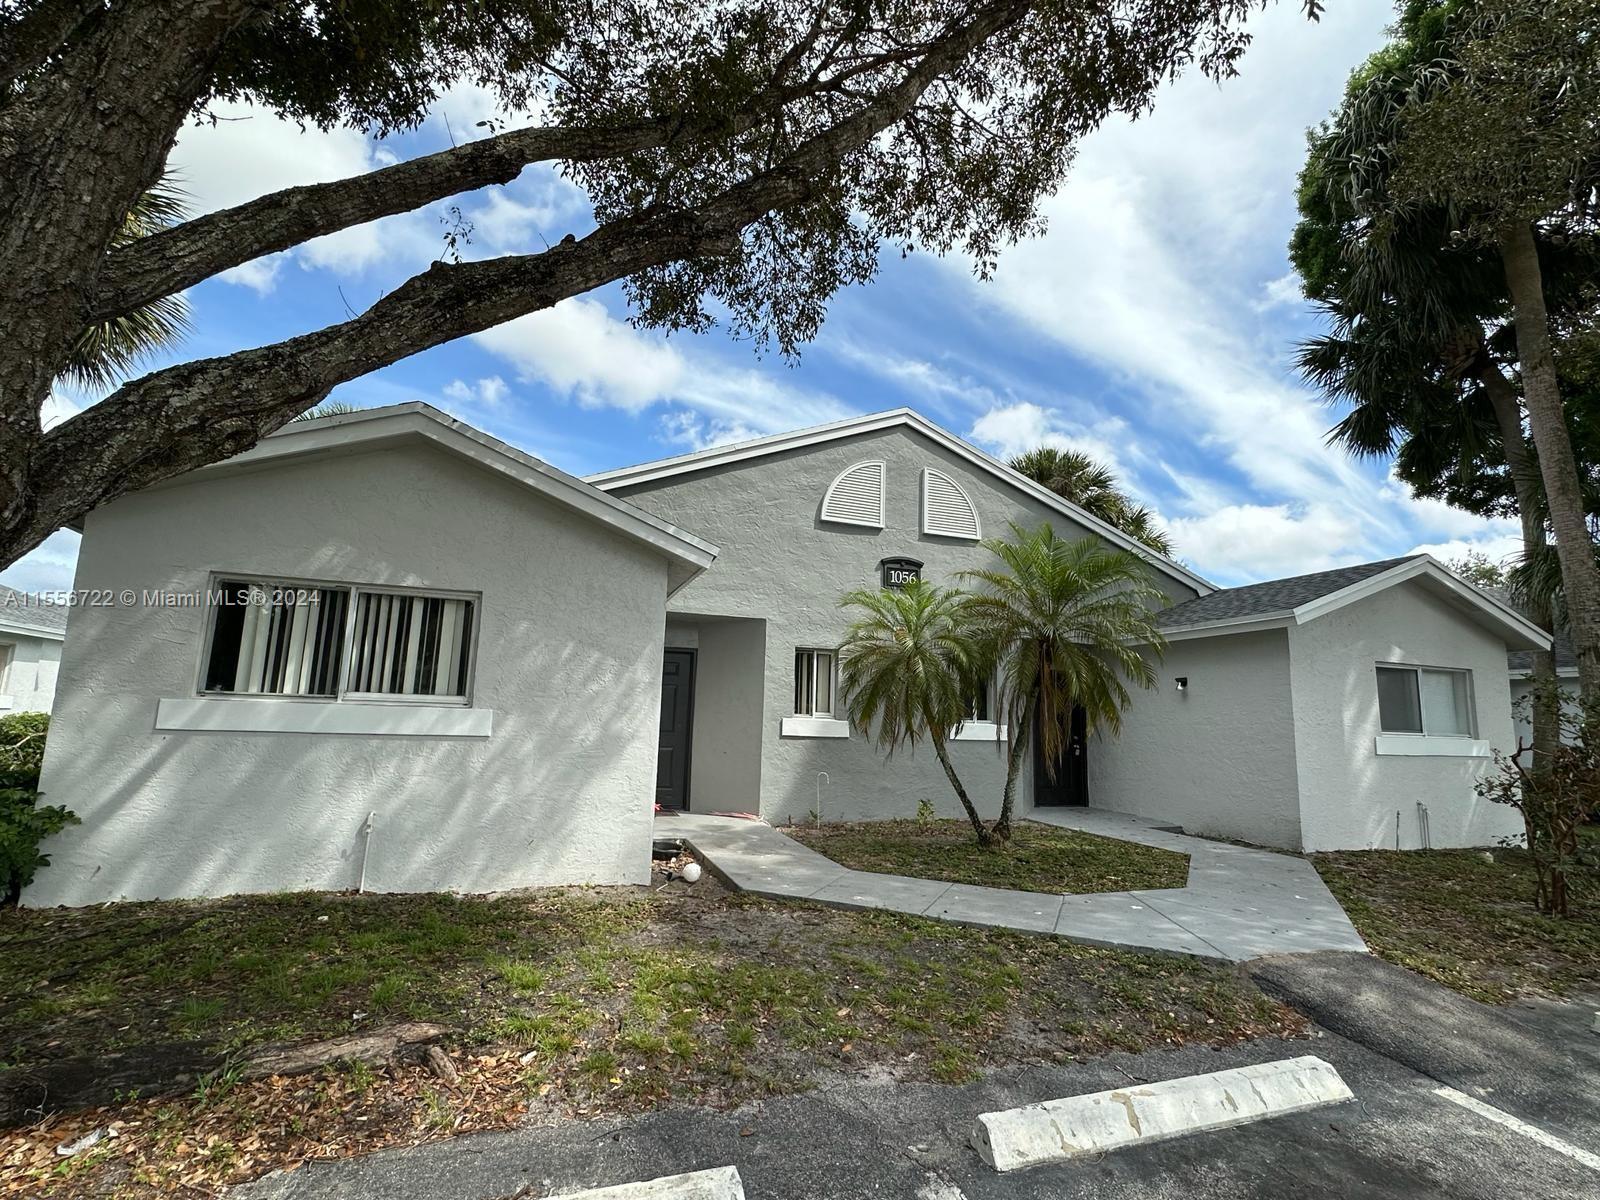 Property for Sale at 1056 Lake Victoria Dr B, West Palm Beach, Palm Beach County, Florida - Bedrooms: 3 
Bathrooms: 2  - $287,500